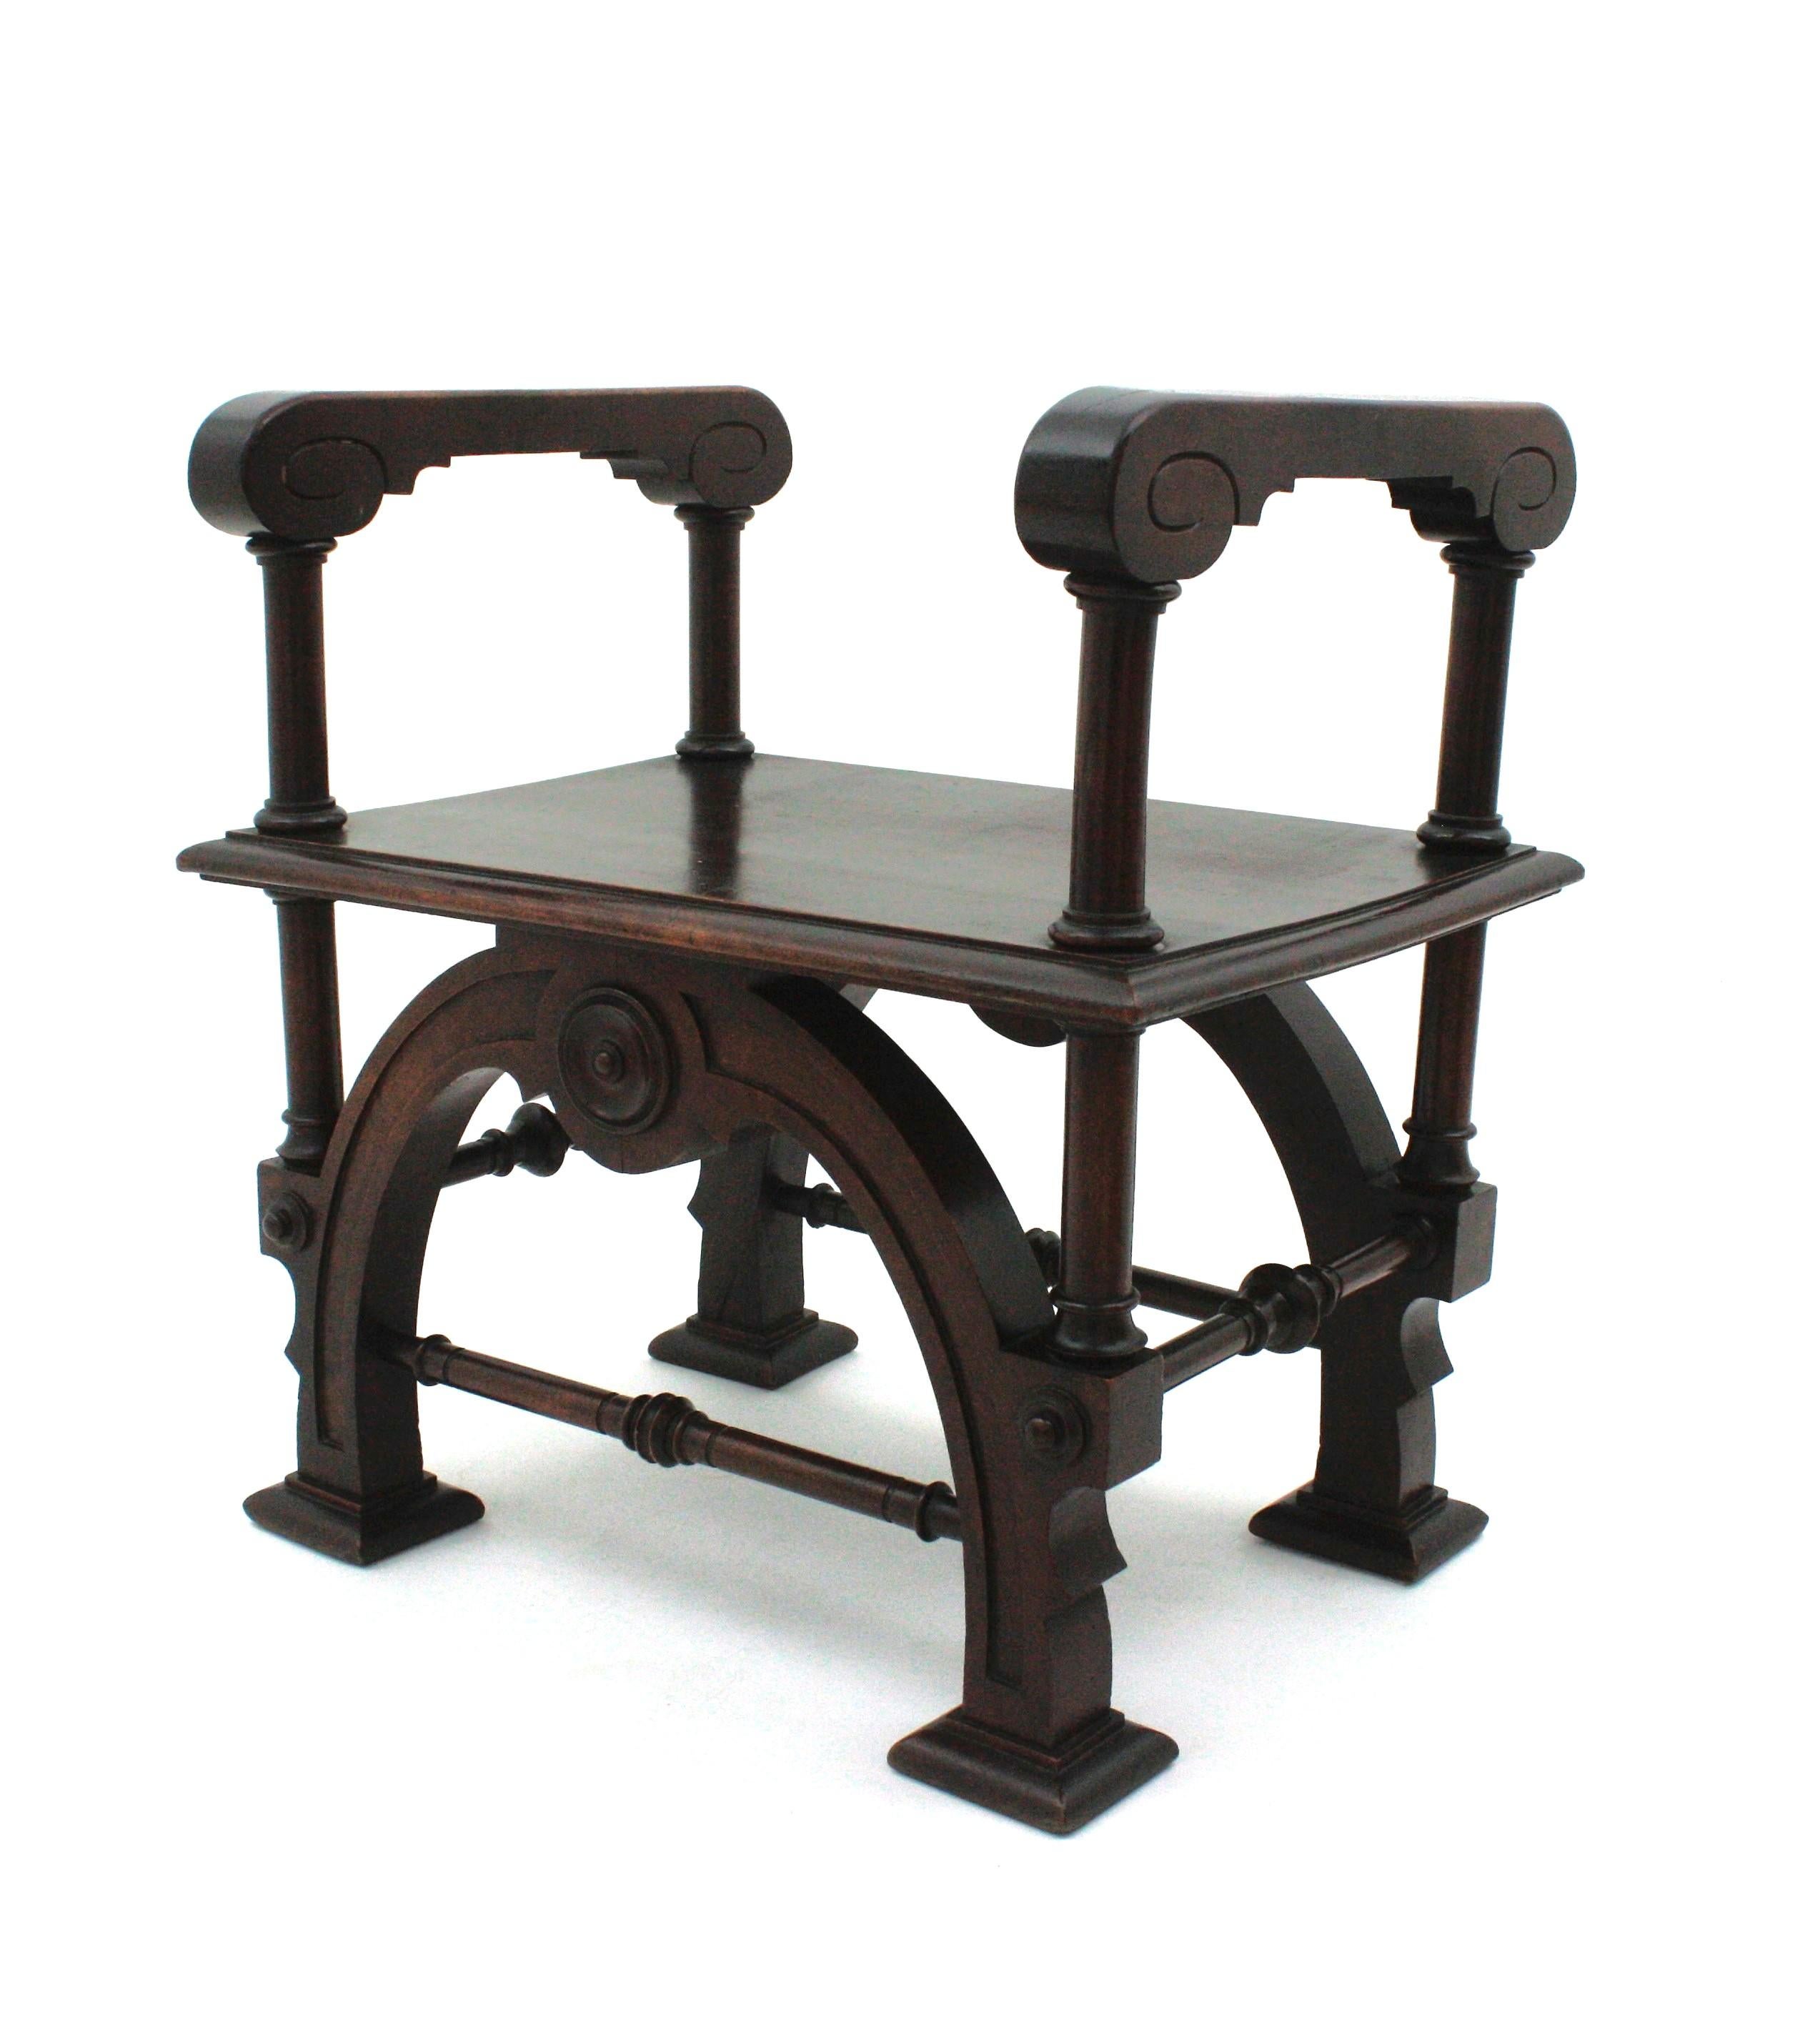 20th Century Spanish Revival Carved Stool or Bench in Walnut, 1940s For Sale